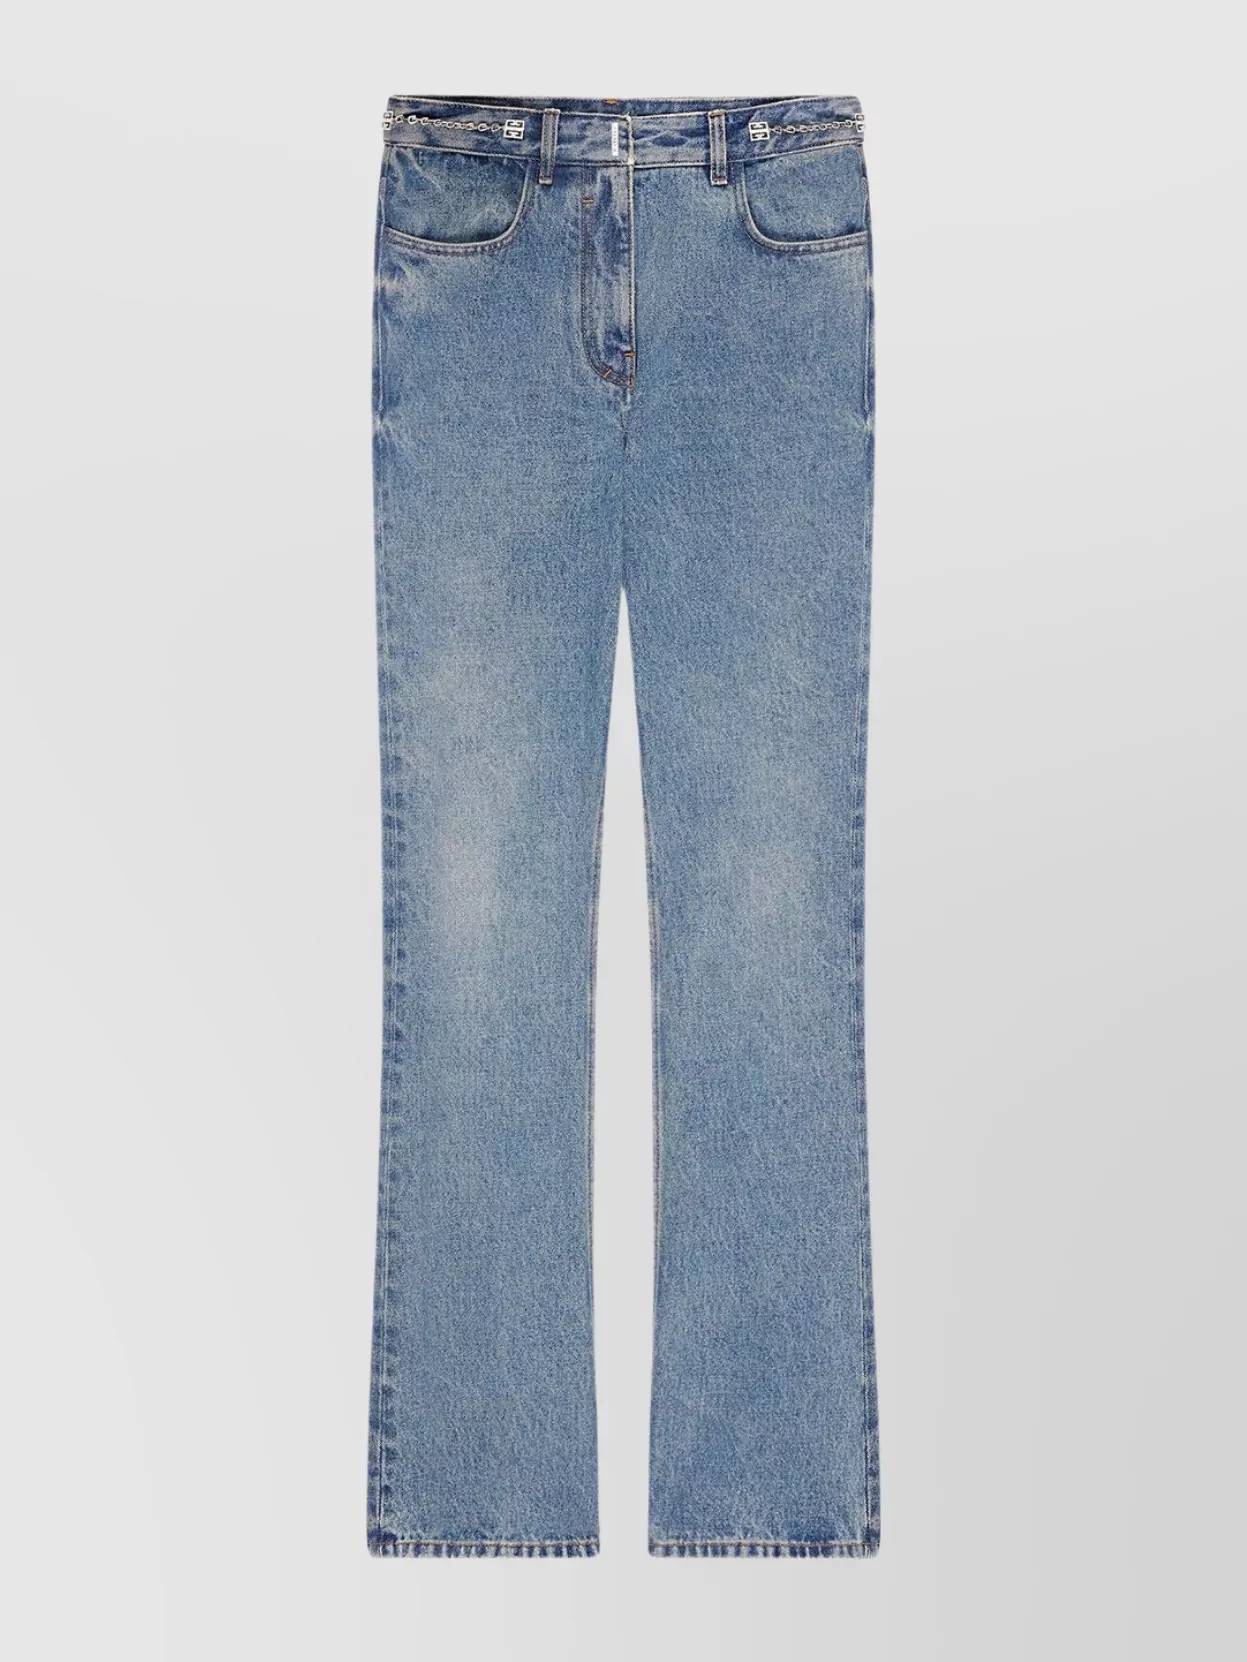 Shop Givenchy Denim Trousers Featuring Chain Accents In Blue